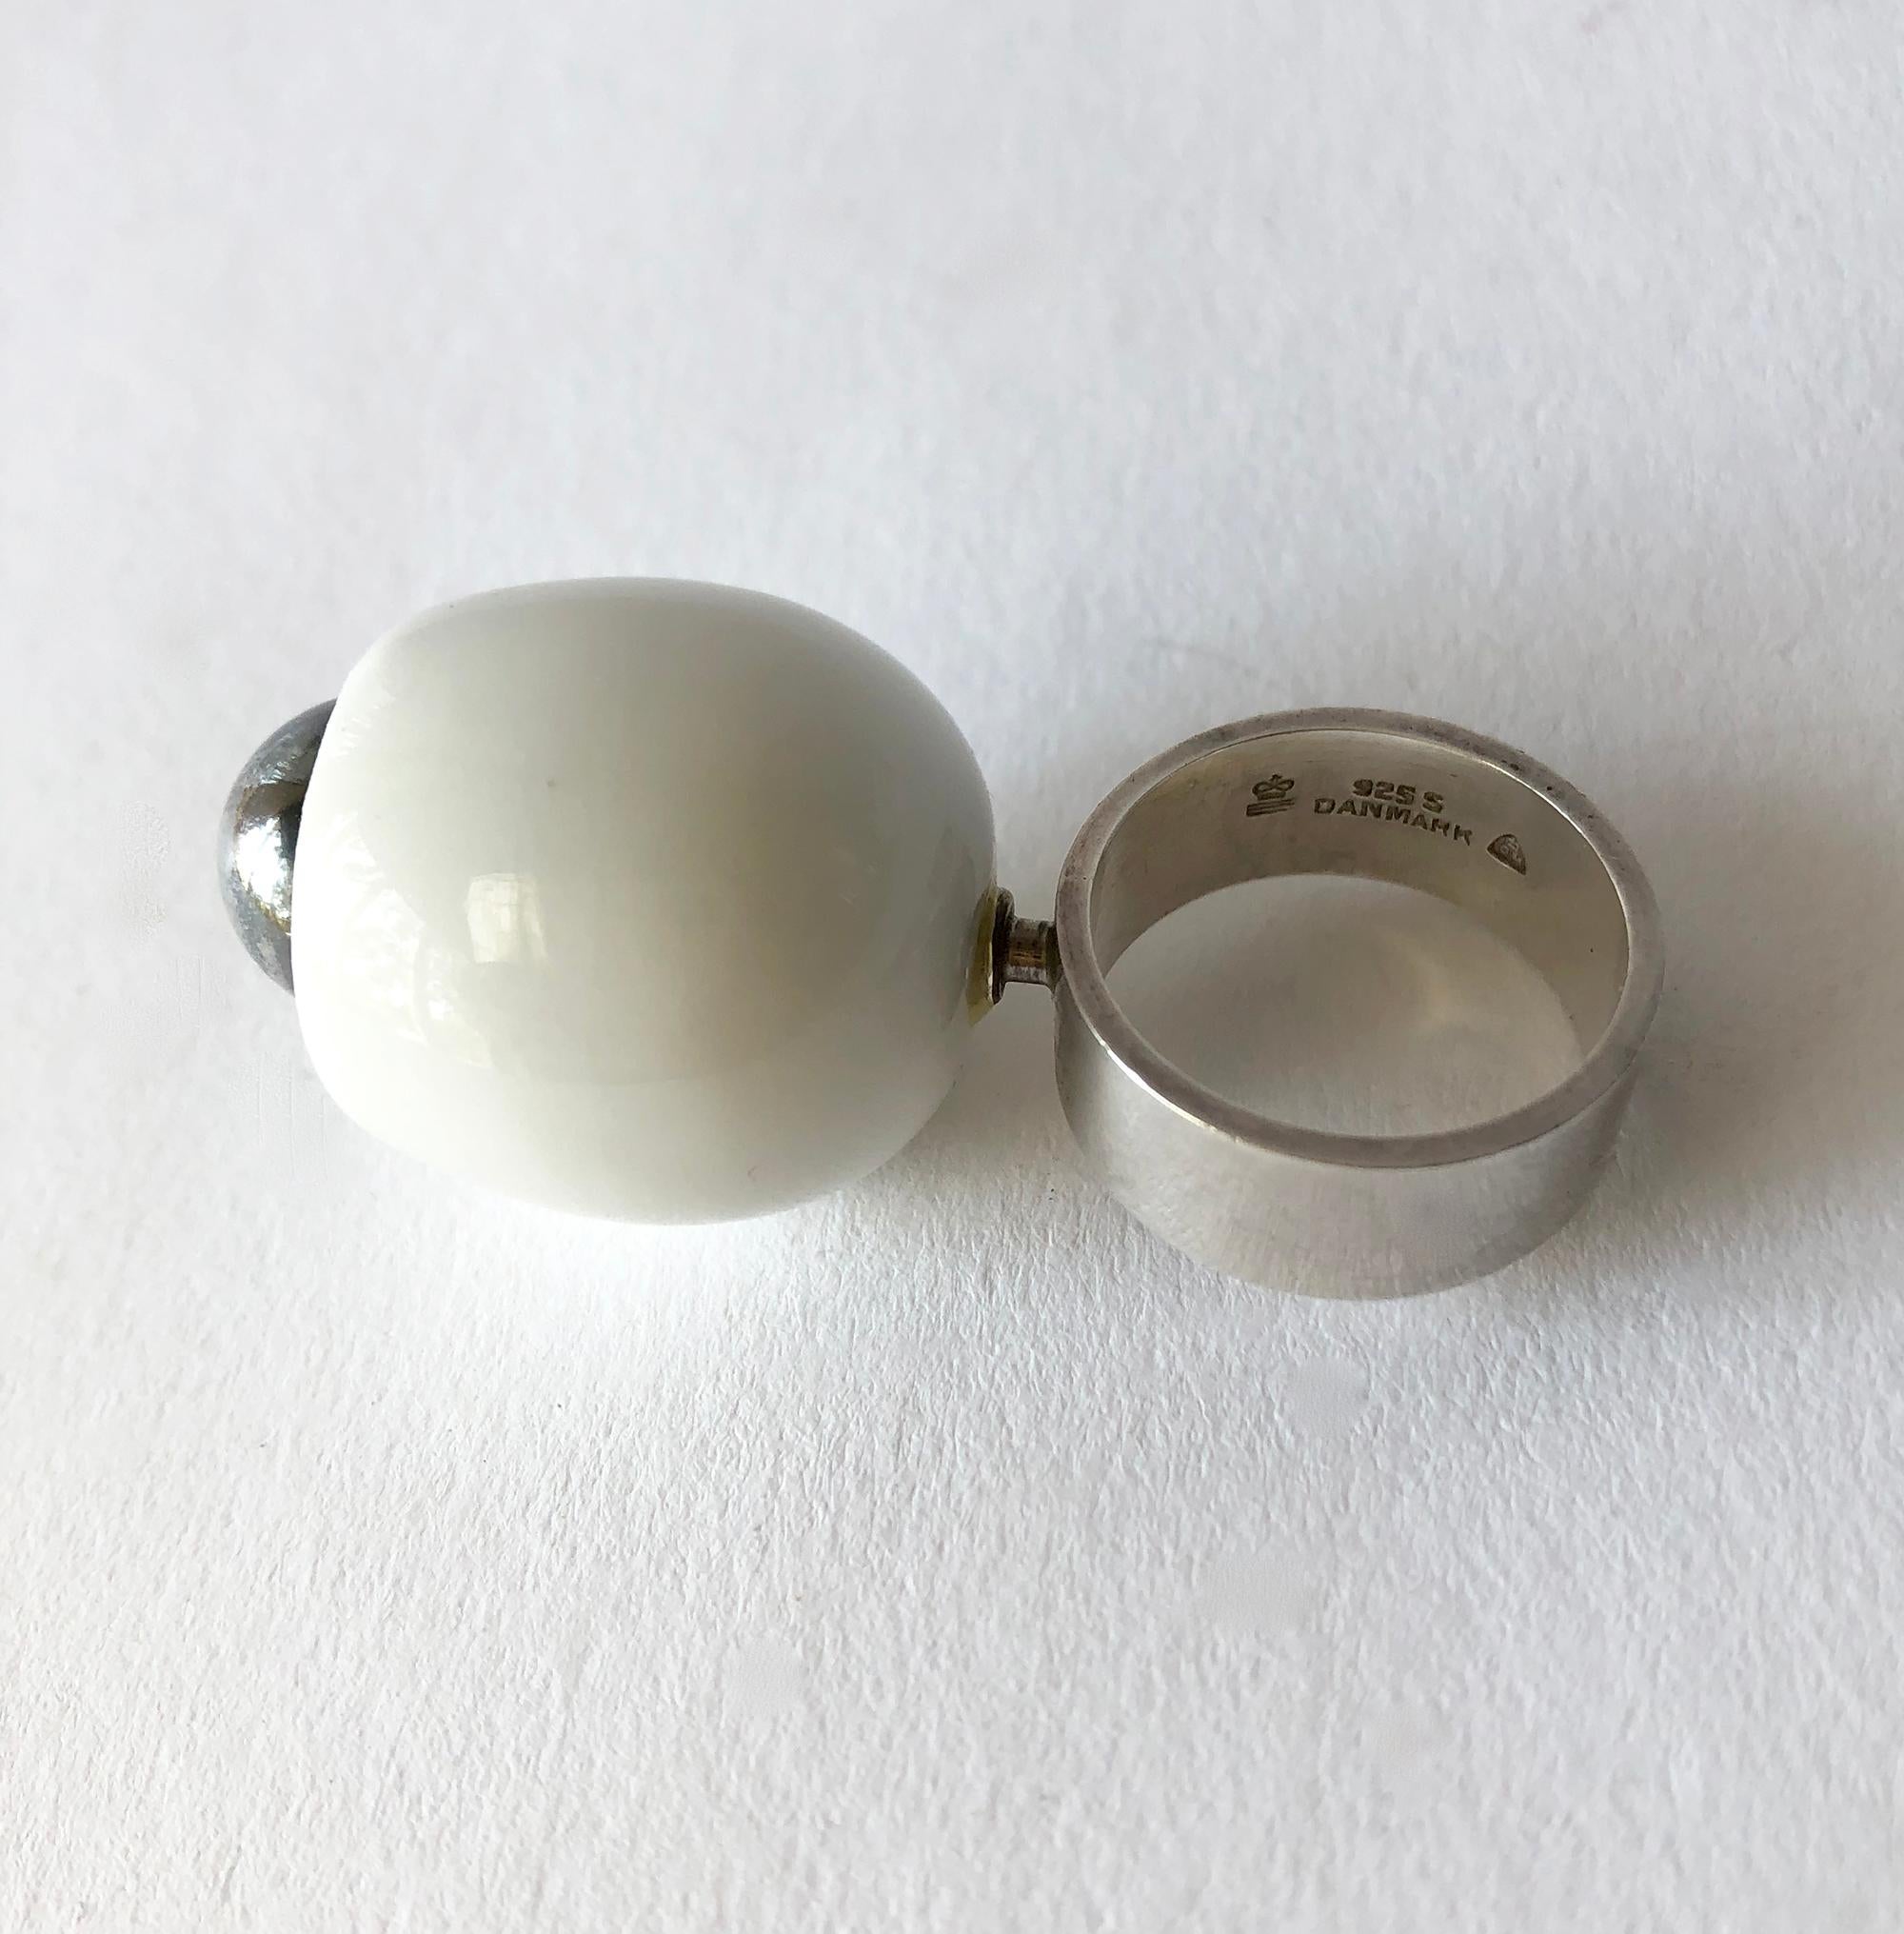 1960's Danish modernist Royal Bini ring created by Anton Michelsen for Royal Copenhagen of Denmark. Ring is a finger size 7 and is made up of a porcelain egg shaped cup and a large sterling silver ball centered within. Ring sits about 1 1/4